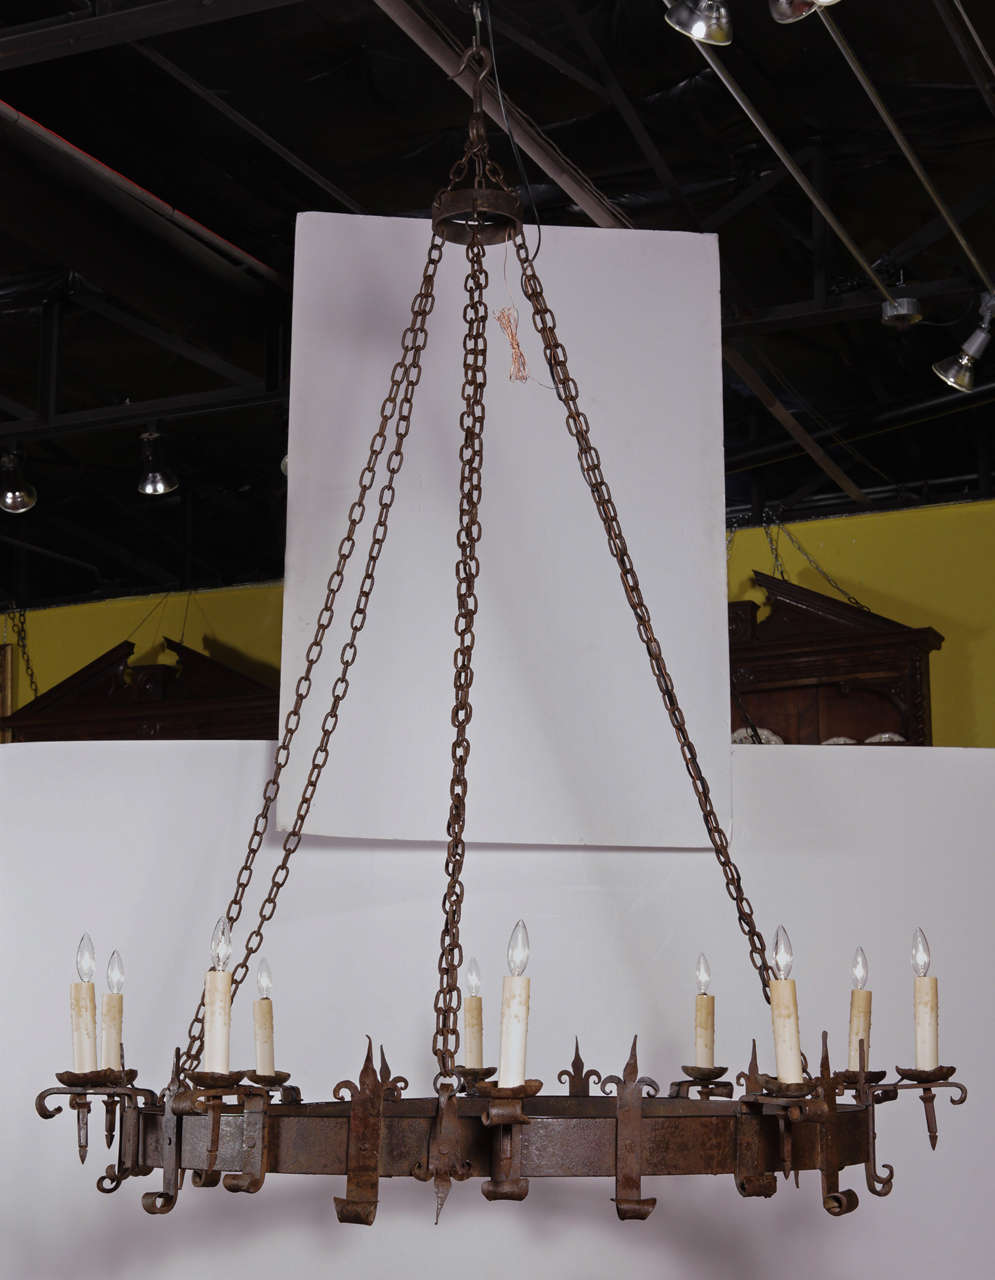 Imposing 19th Century hand-forged wrought iron chandelier suspended by original chain. The fixture is decorated with fleur-de-lys between the lights. Wiring and was candle sleeves are new.  Finish is original.